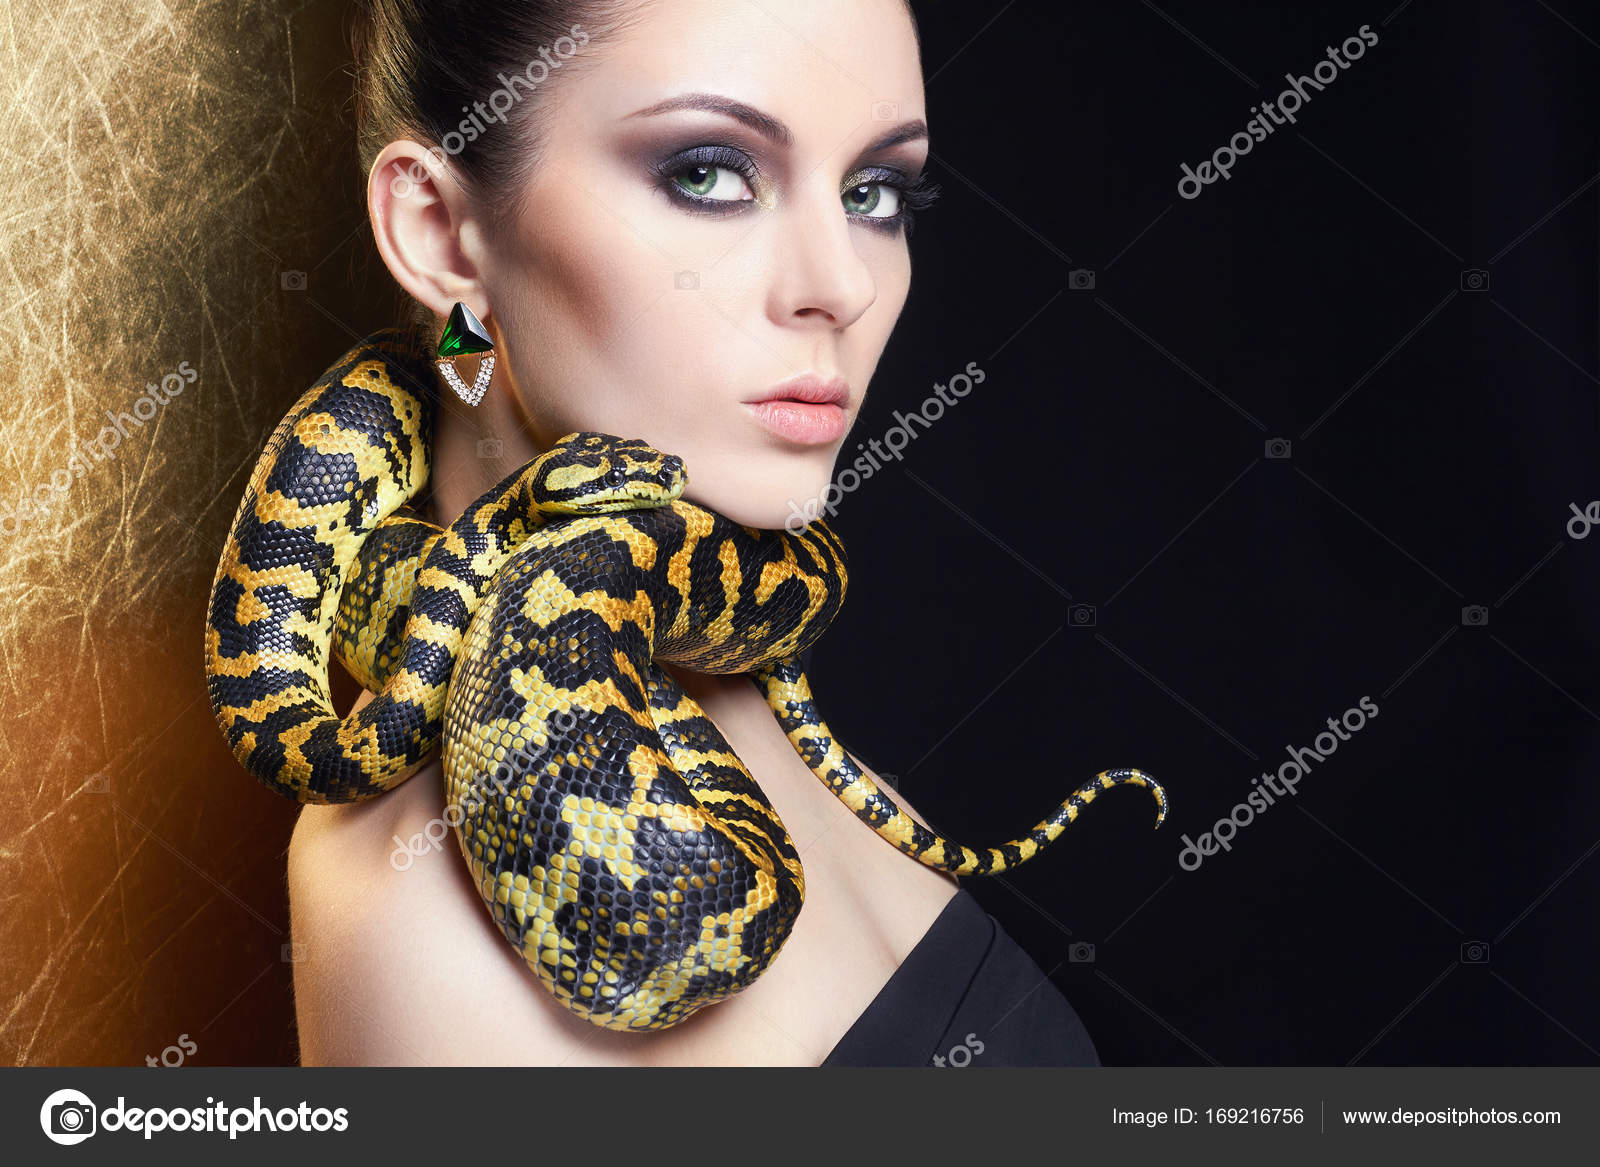 hot girls w snakes free pics gallery